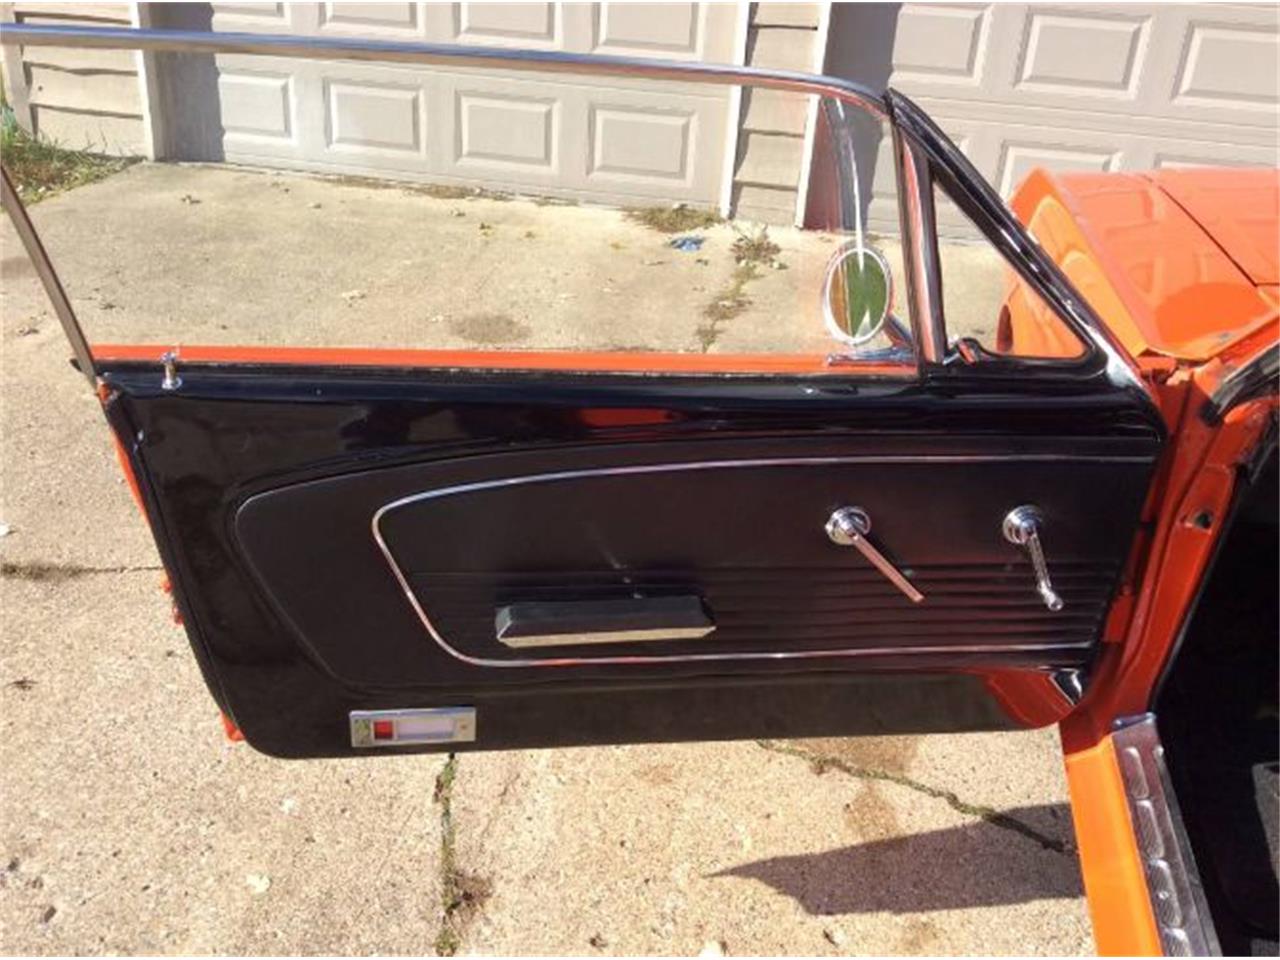 1966 Ford Mustang for sale in Cadillac, MI – photo 2